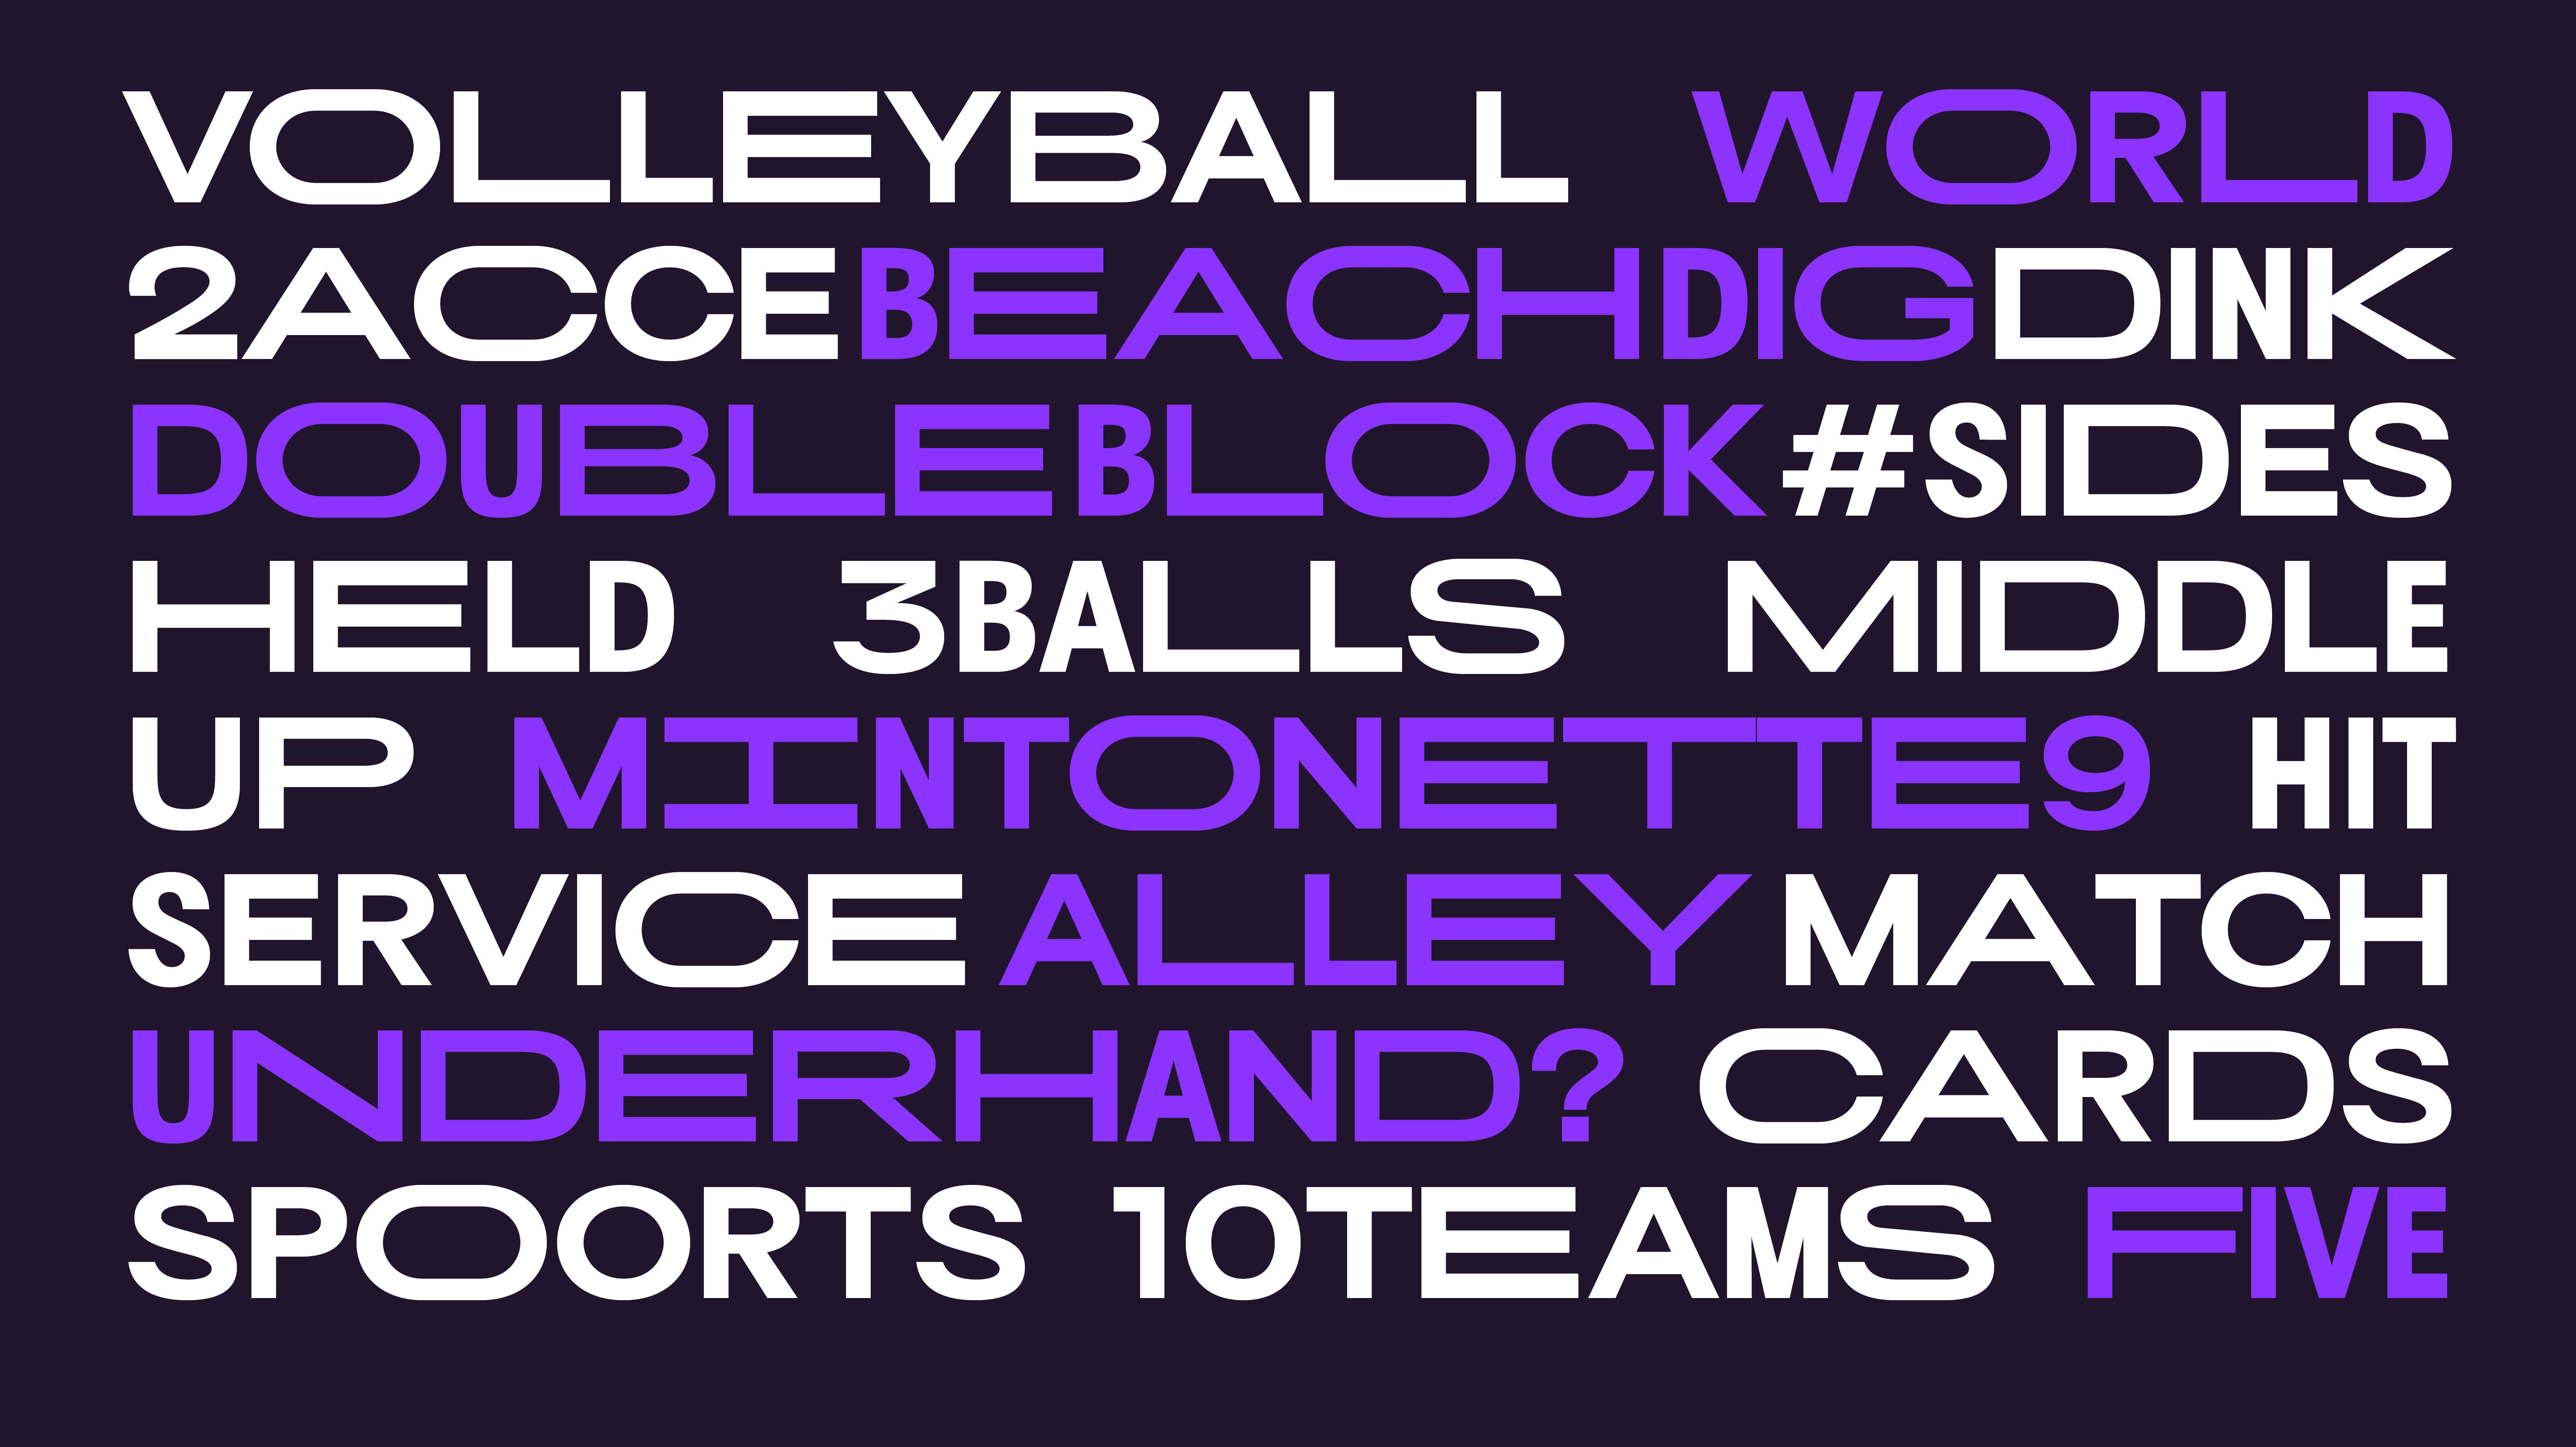 Volleyball World font family showcase